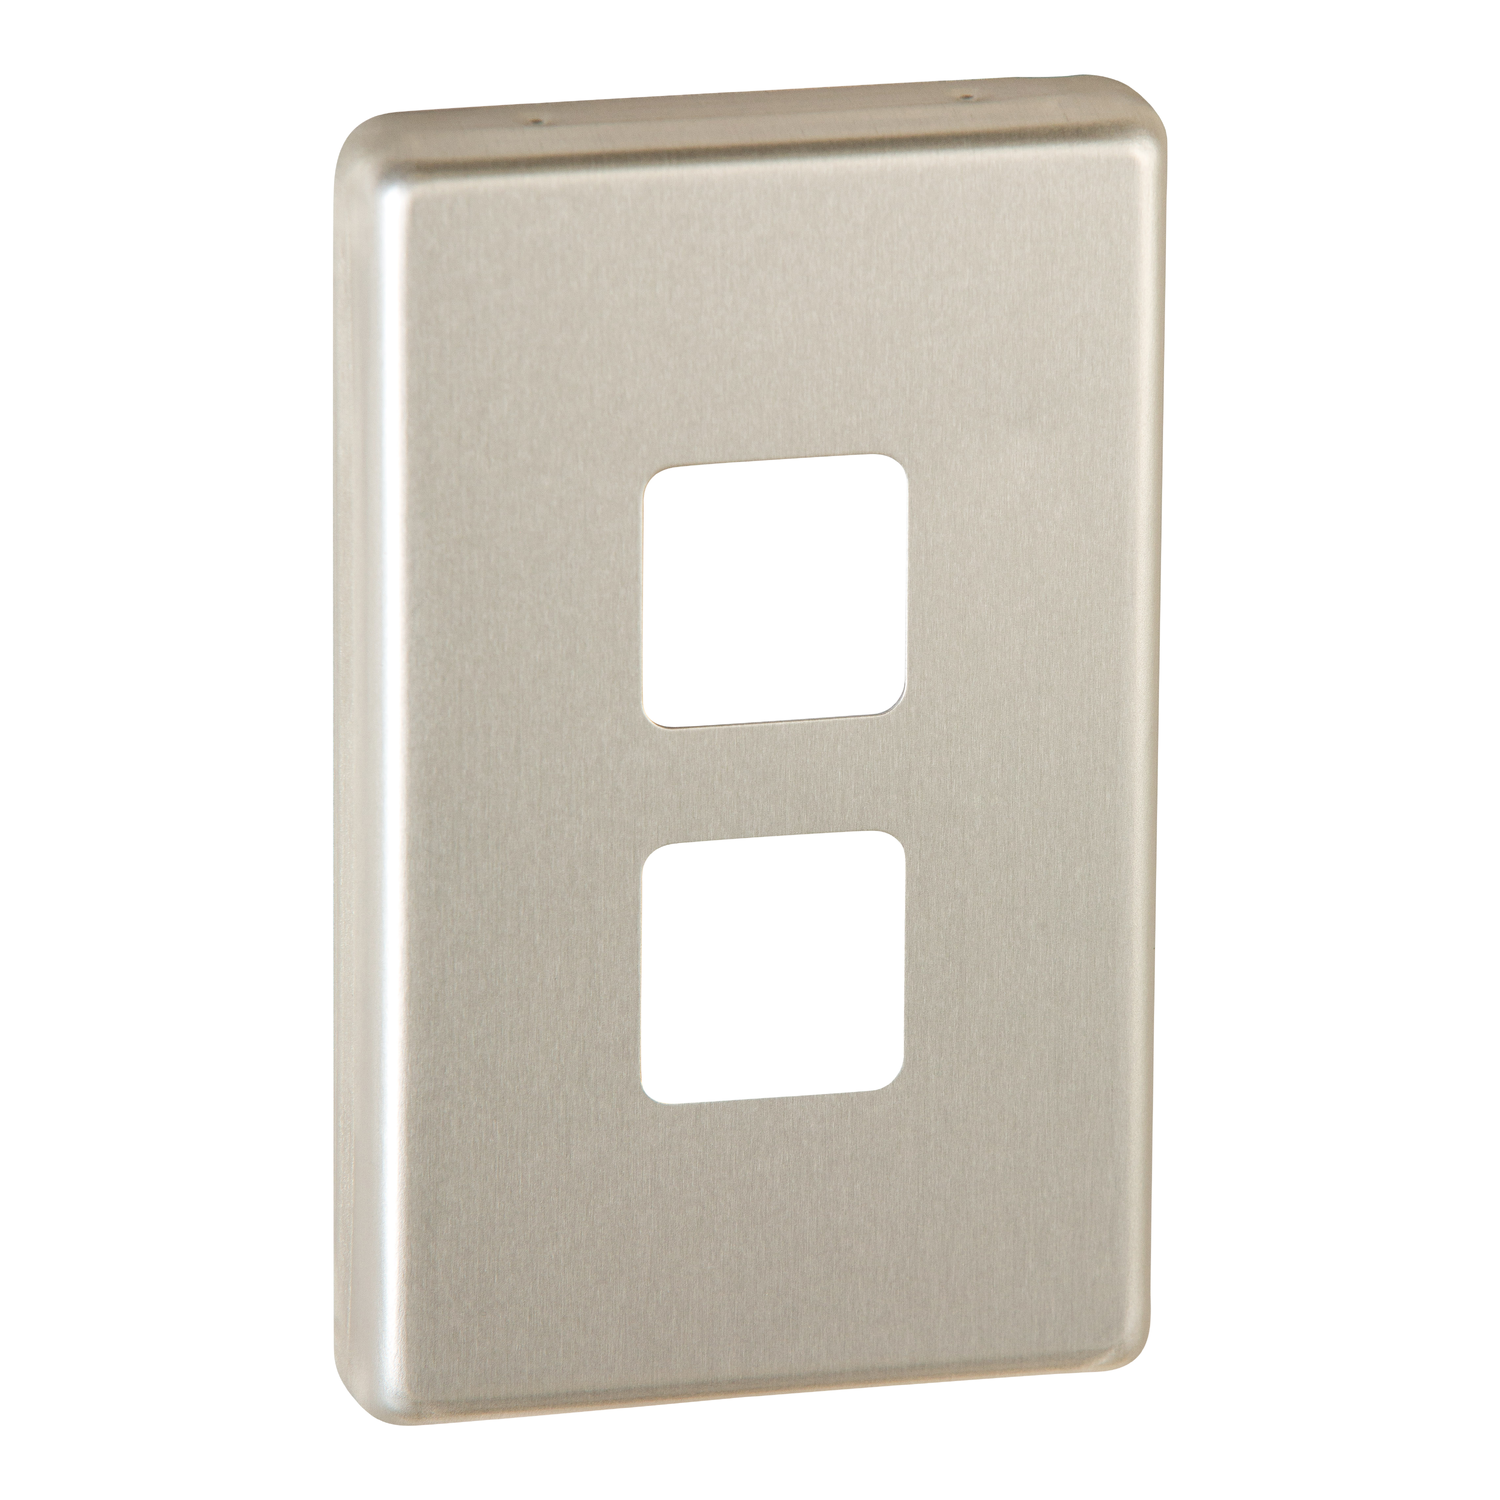 PDL 600 Series - Cover Plate Switch 2-Gang - Stainless steel